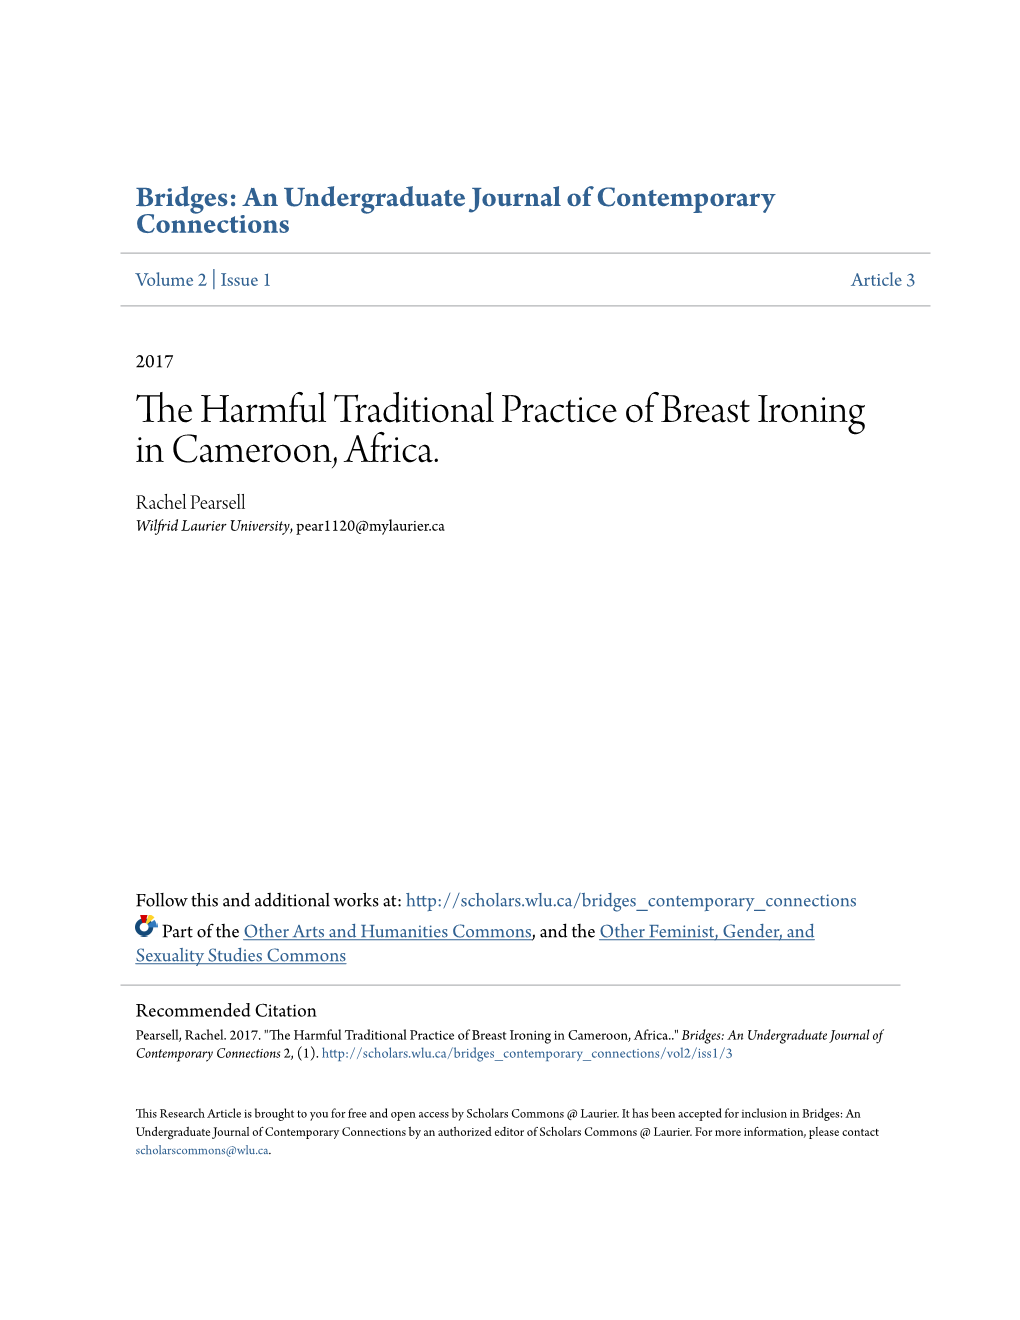 The Harmful Traditional Practice of Breast Ironing in Cameroon, Africa